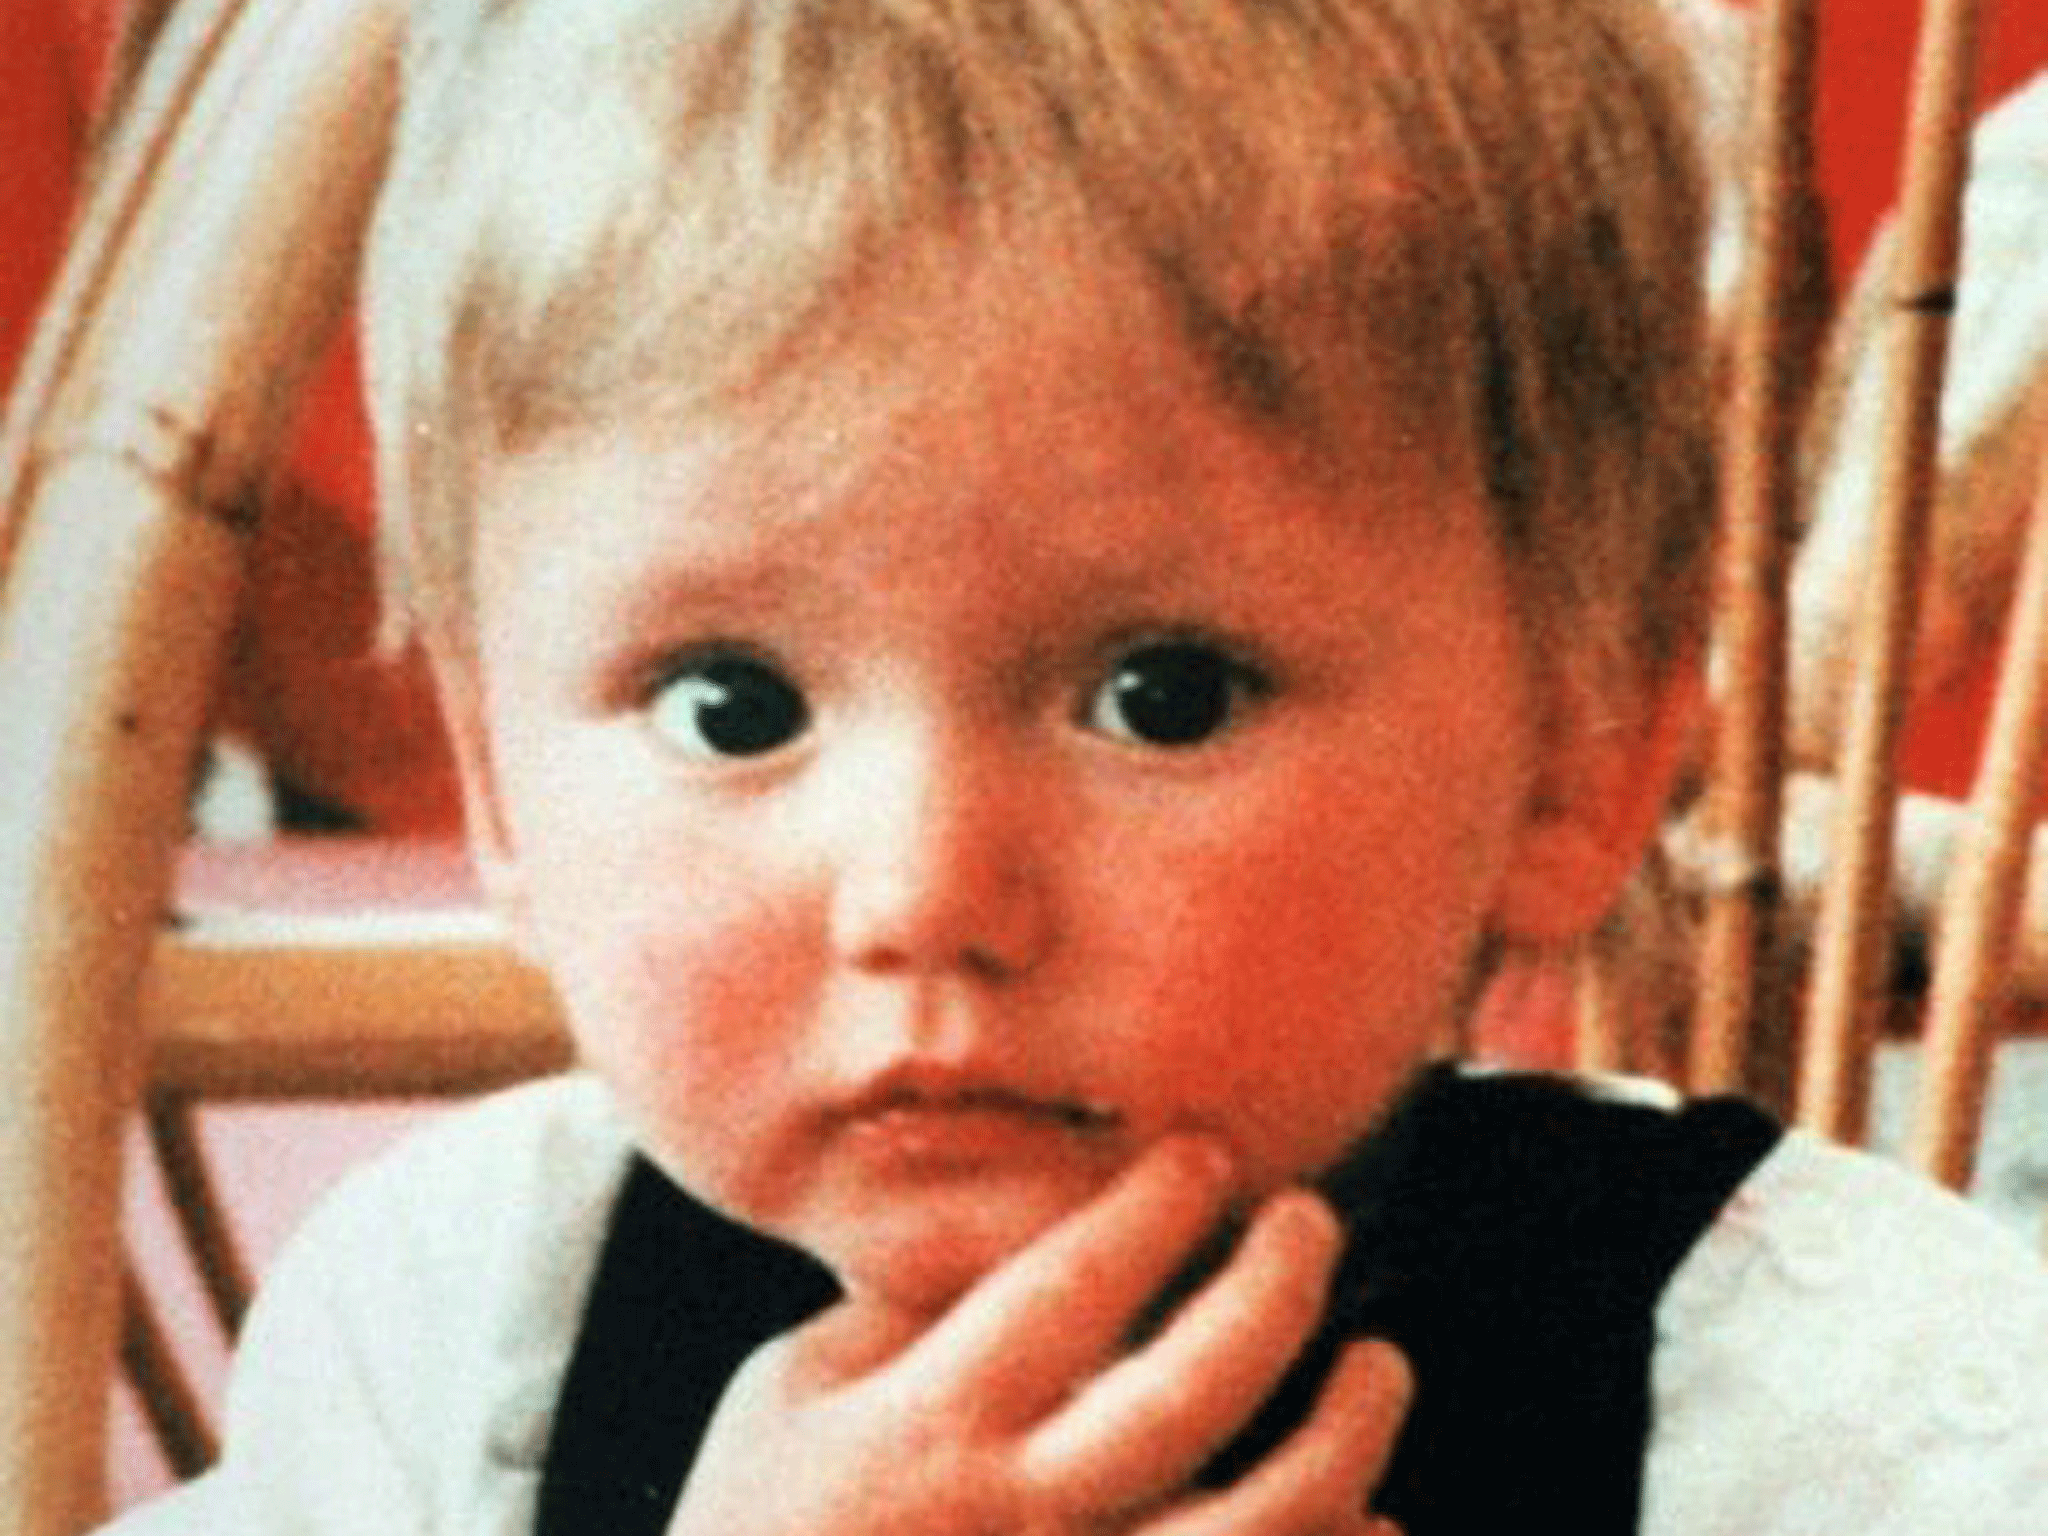 Ben Needham: Man claiming to be toddler who went missing 24 years ago 'ruled out'